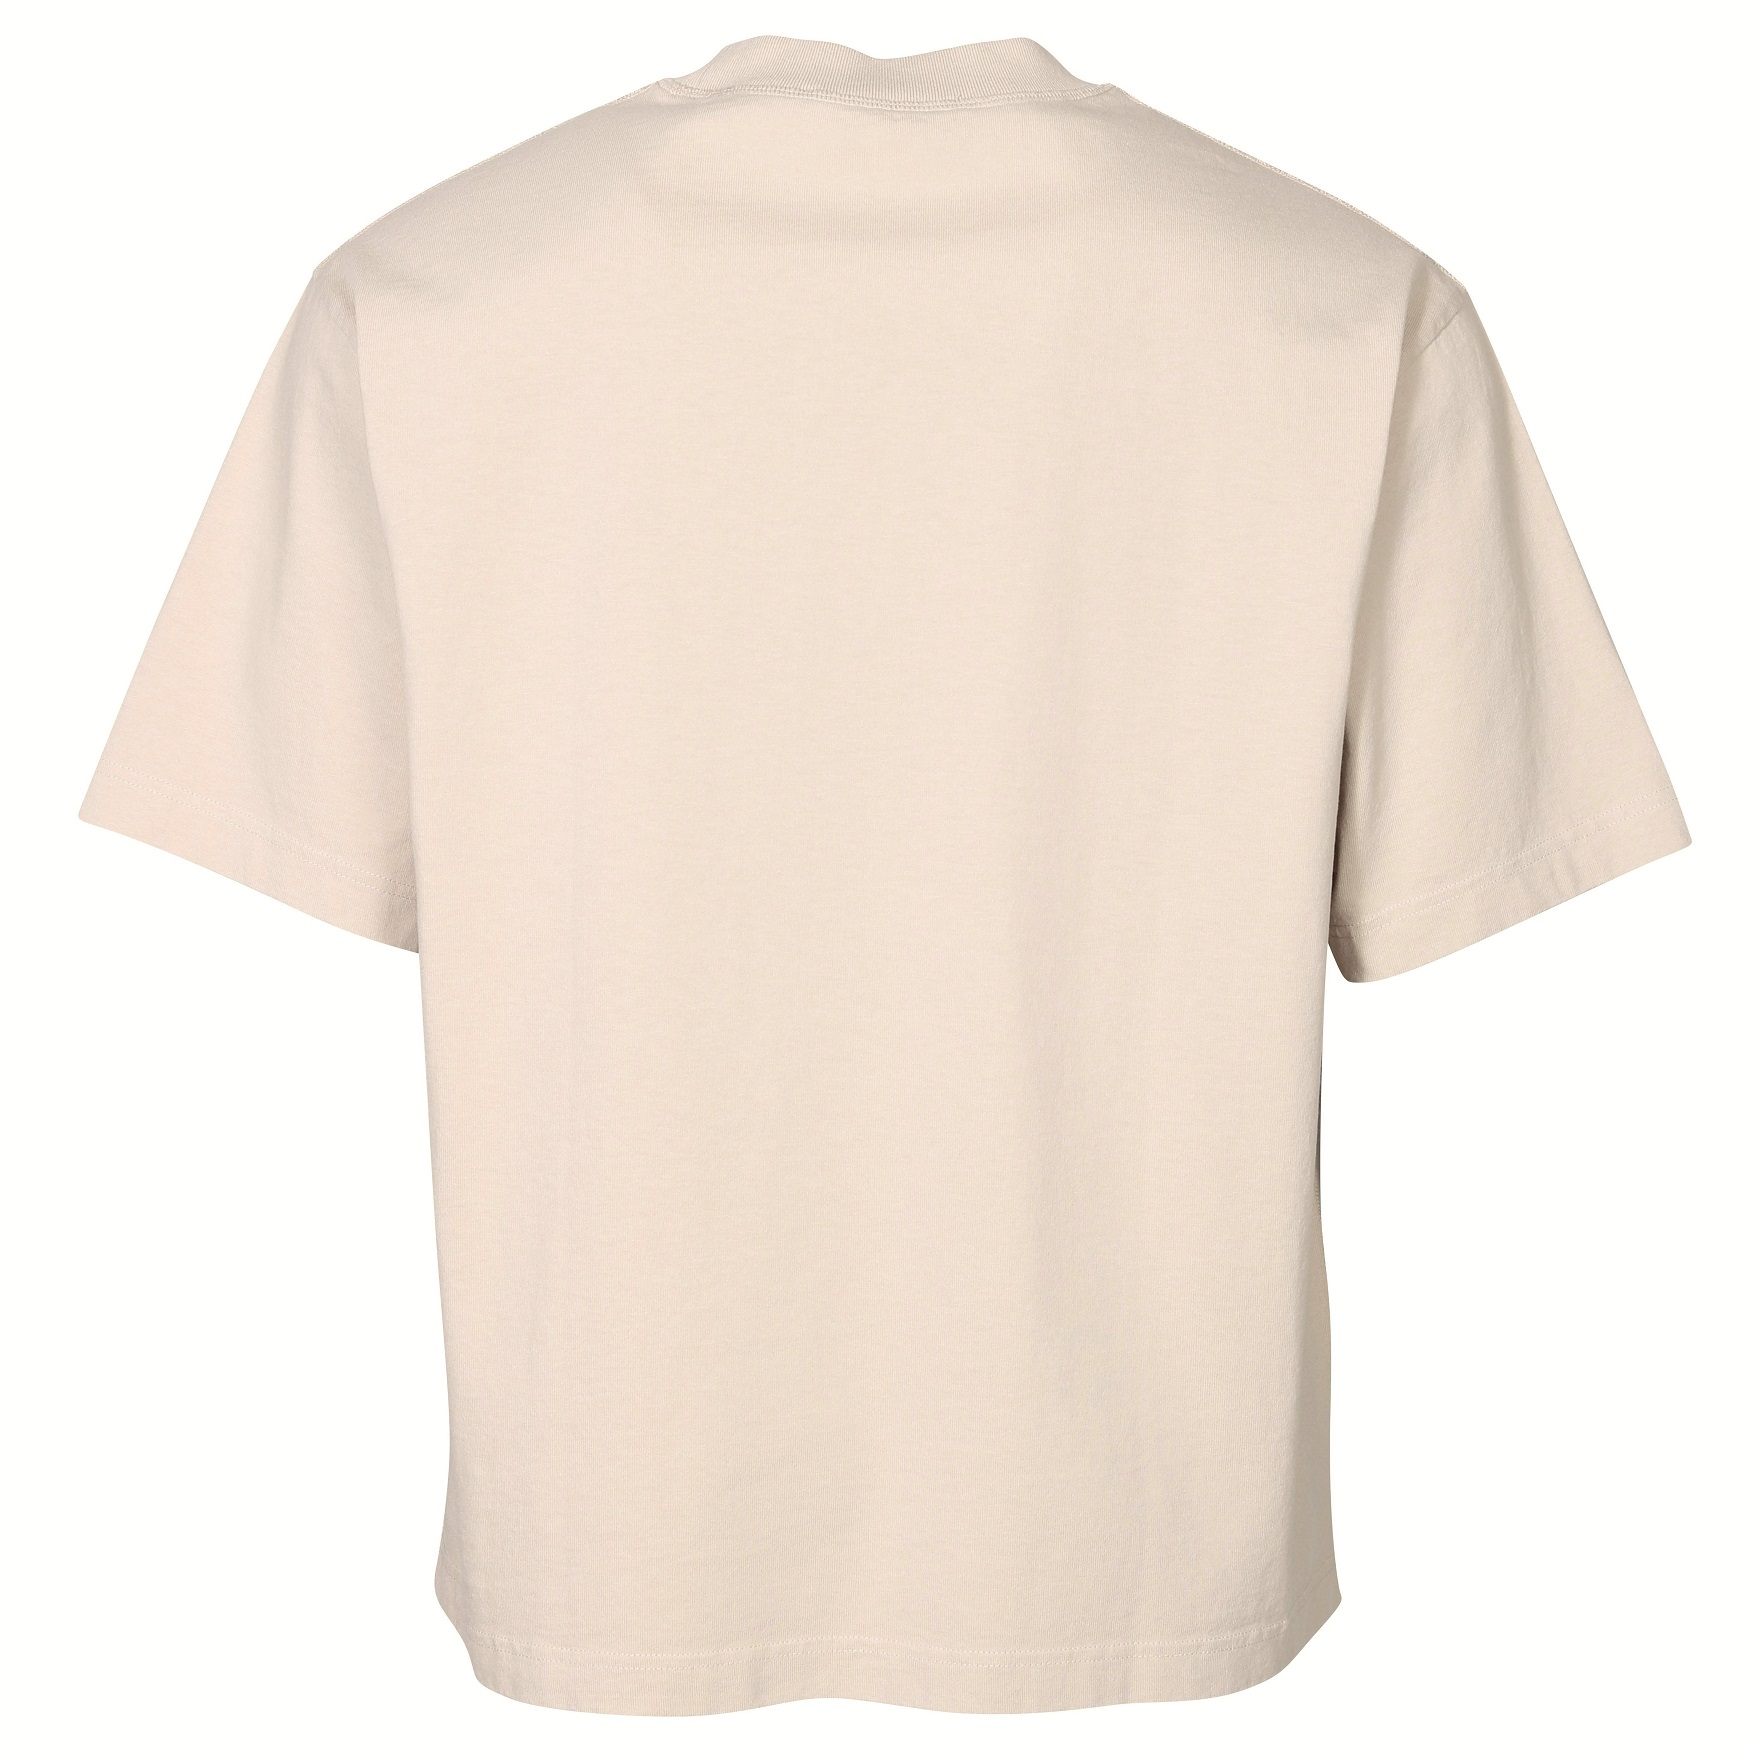 ACNE STUDIOS Loose Fit Stamp T-Shirt in Champagne Beige S